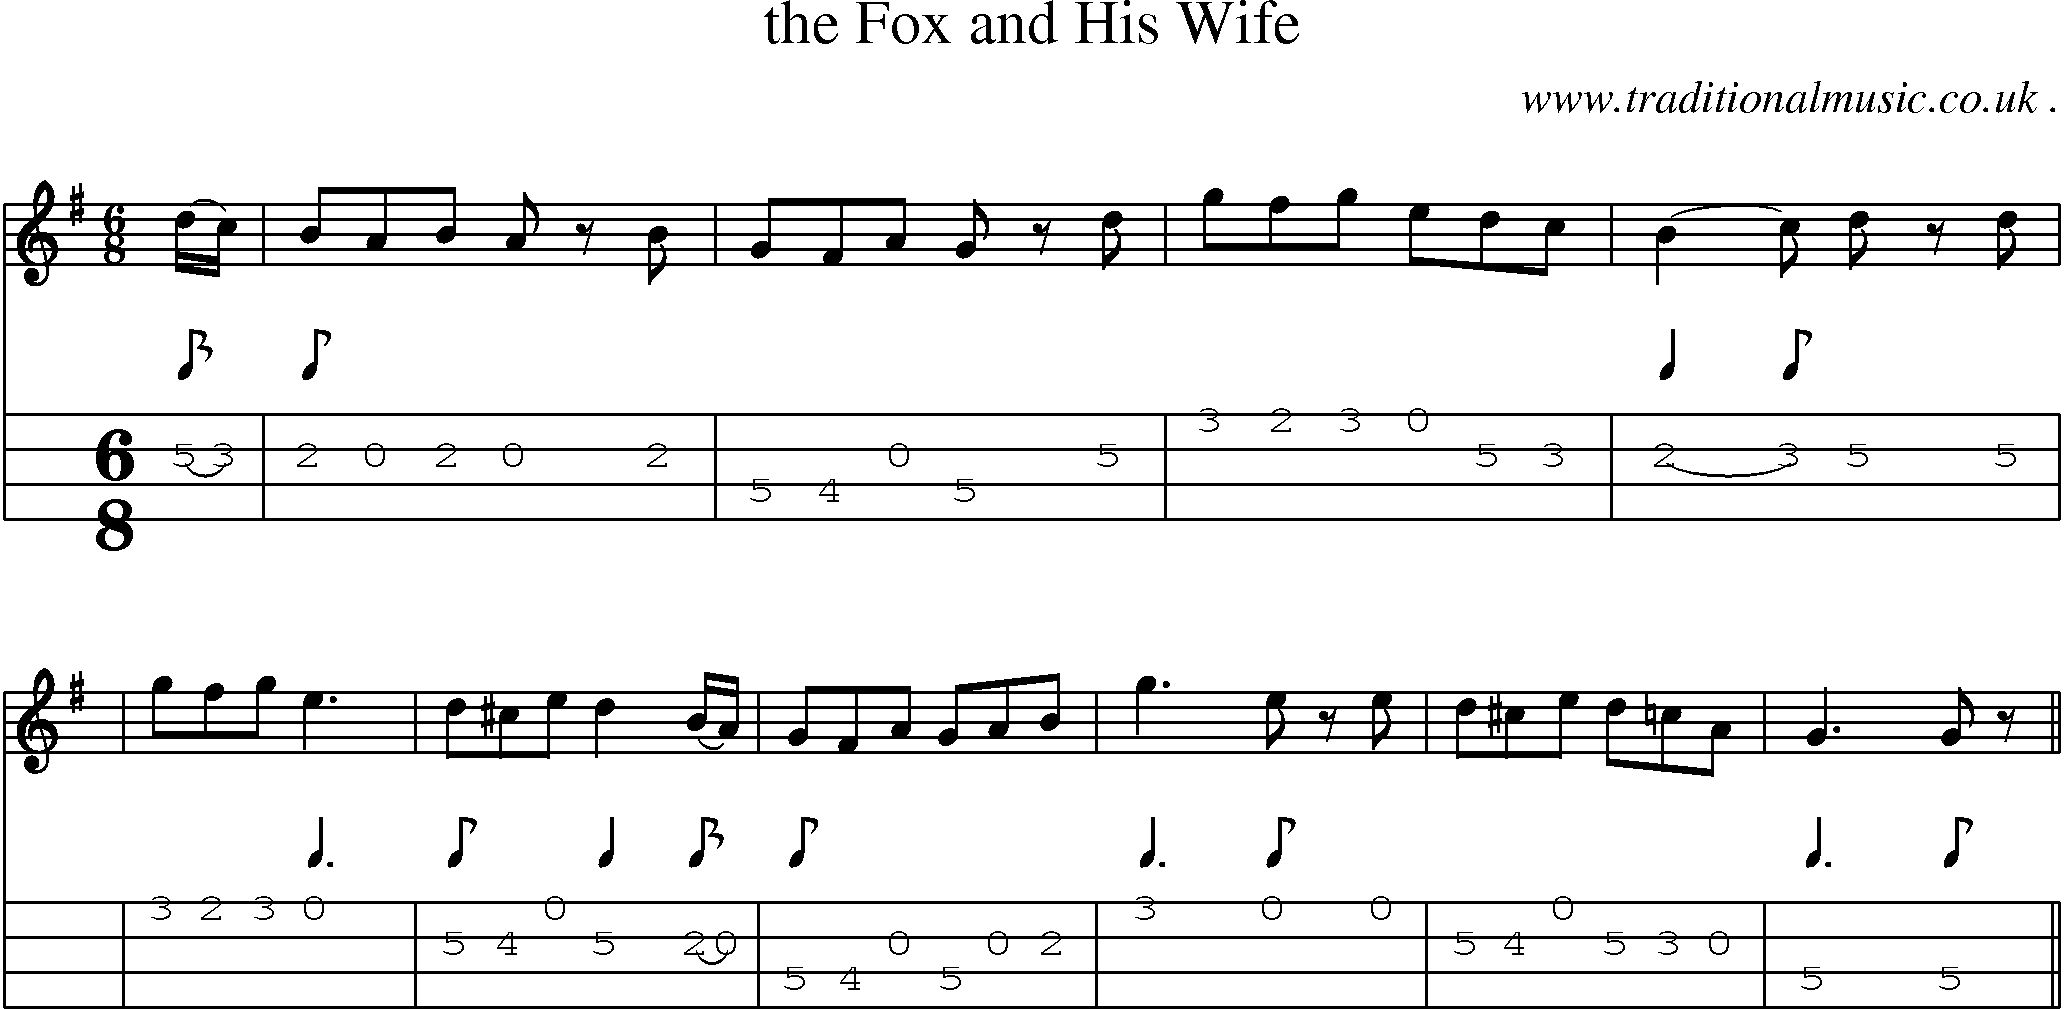 Sheet-music  score, Chords and Mandolin Tabs for The Fox And His Wife